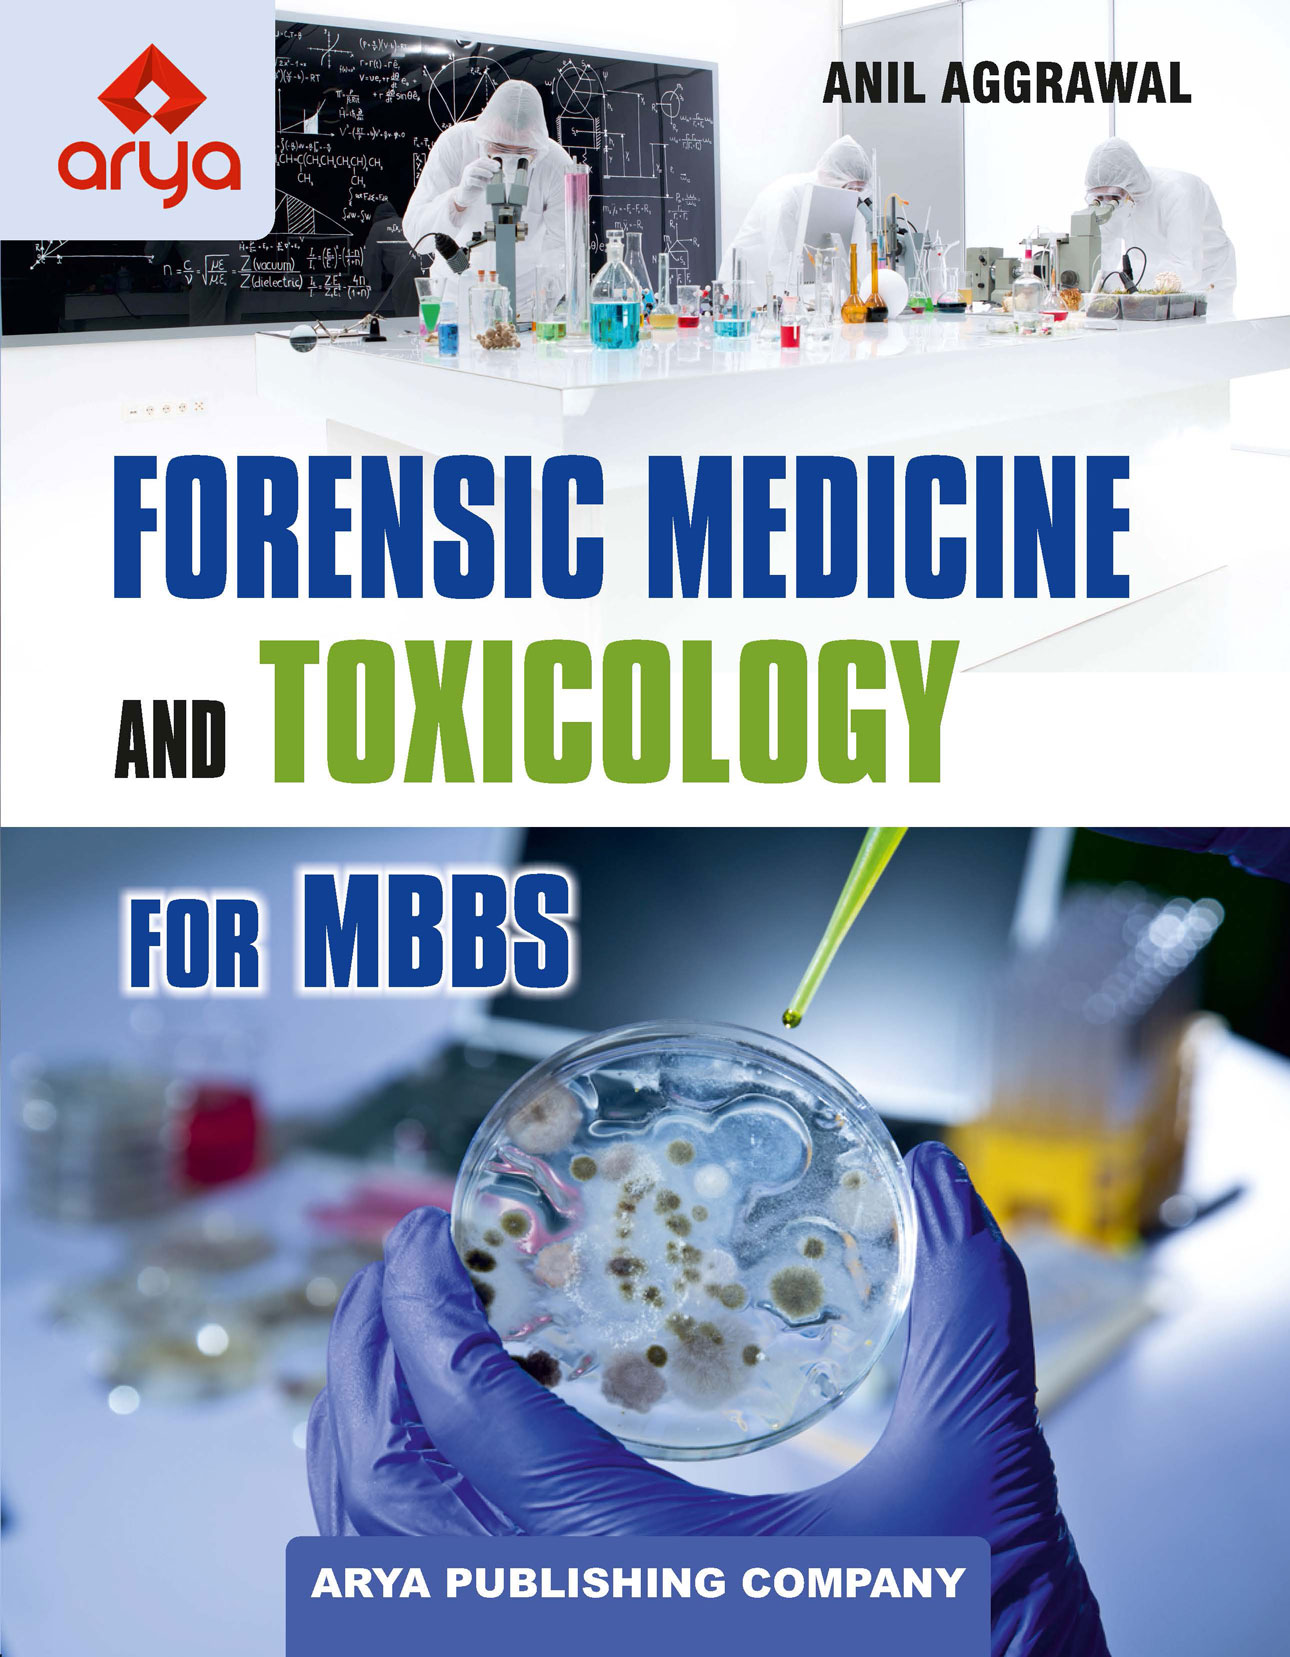 Forensic Medicine and Toxicology for Mbbs